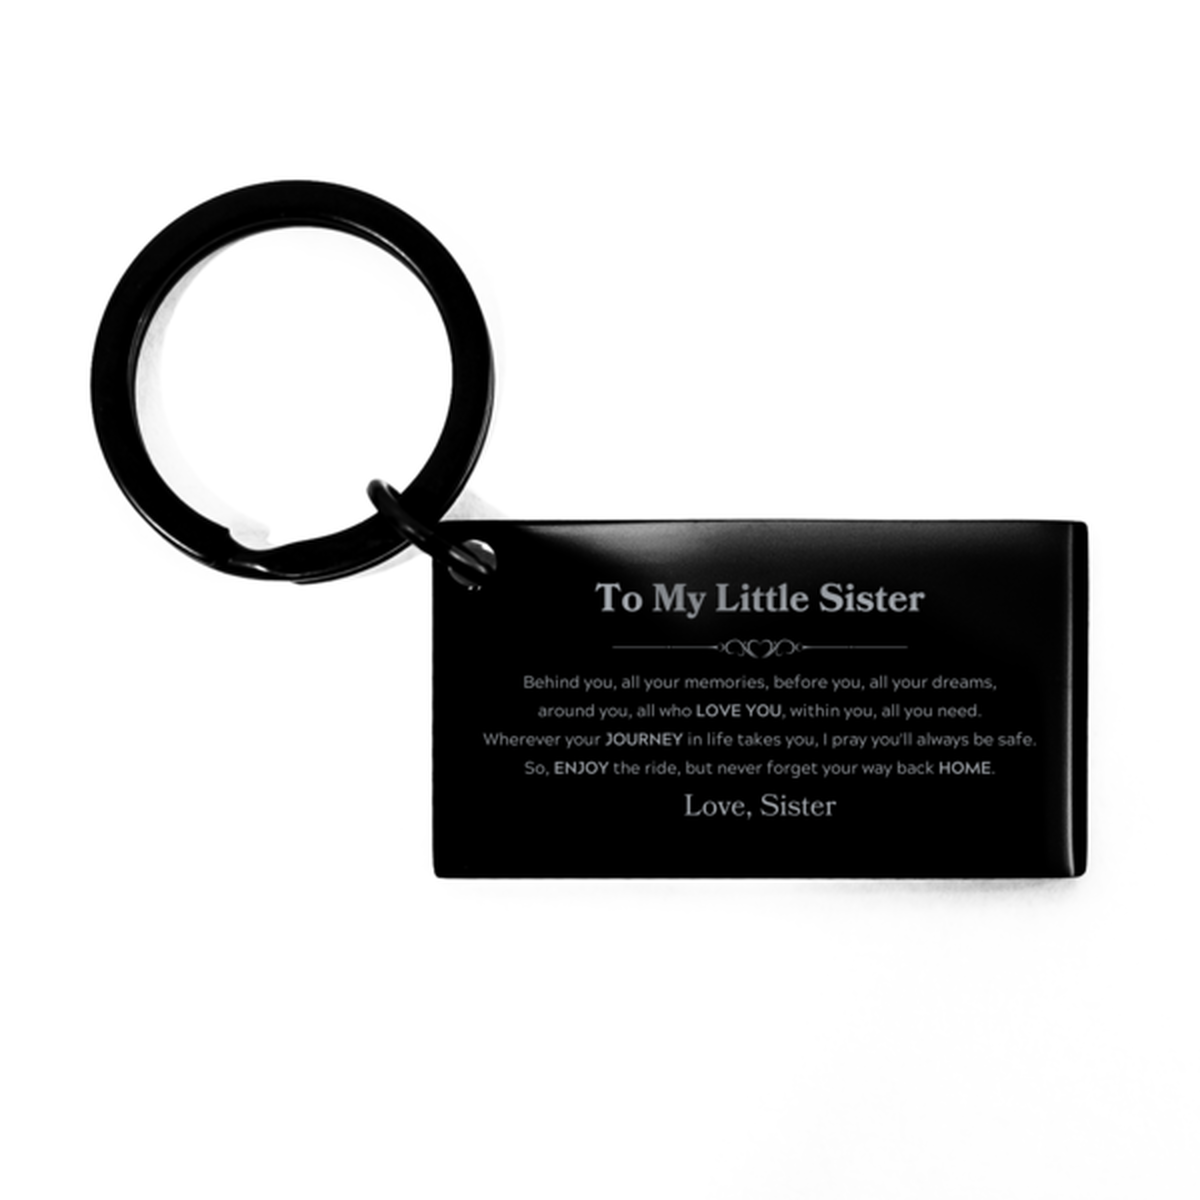 To My Little Sister Graduation Gifts from Sister, Little Sister Keychain Christmas Birthday Gifts for Little Sister Behind you, all your memories, before you, all your dreams. Love, Sister